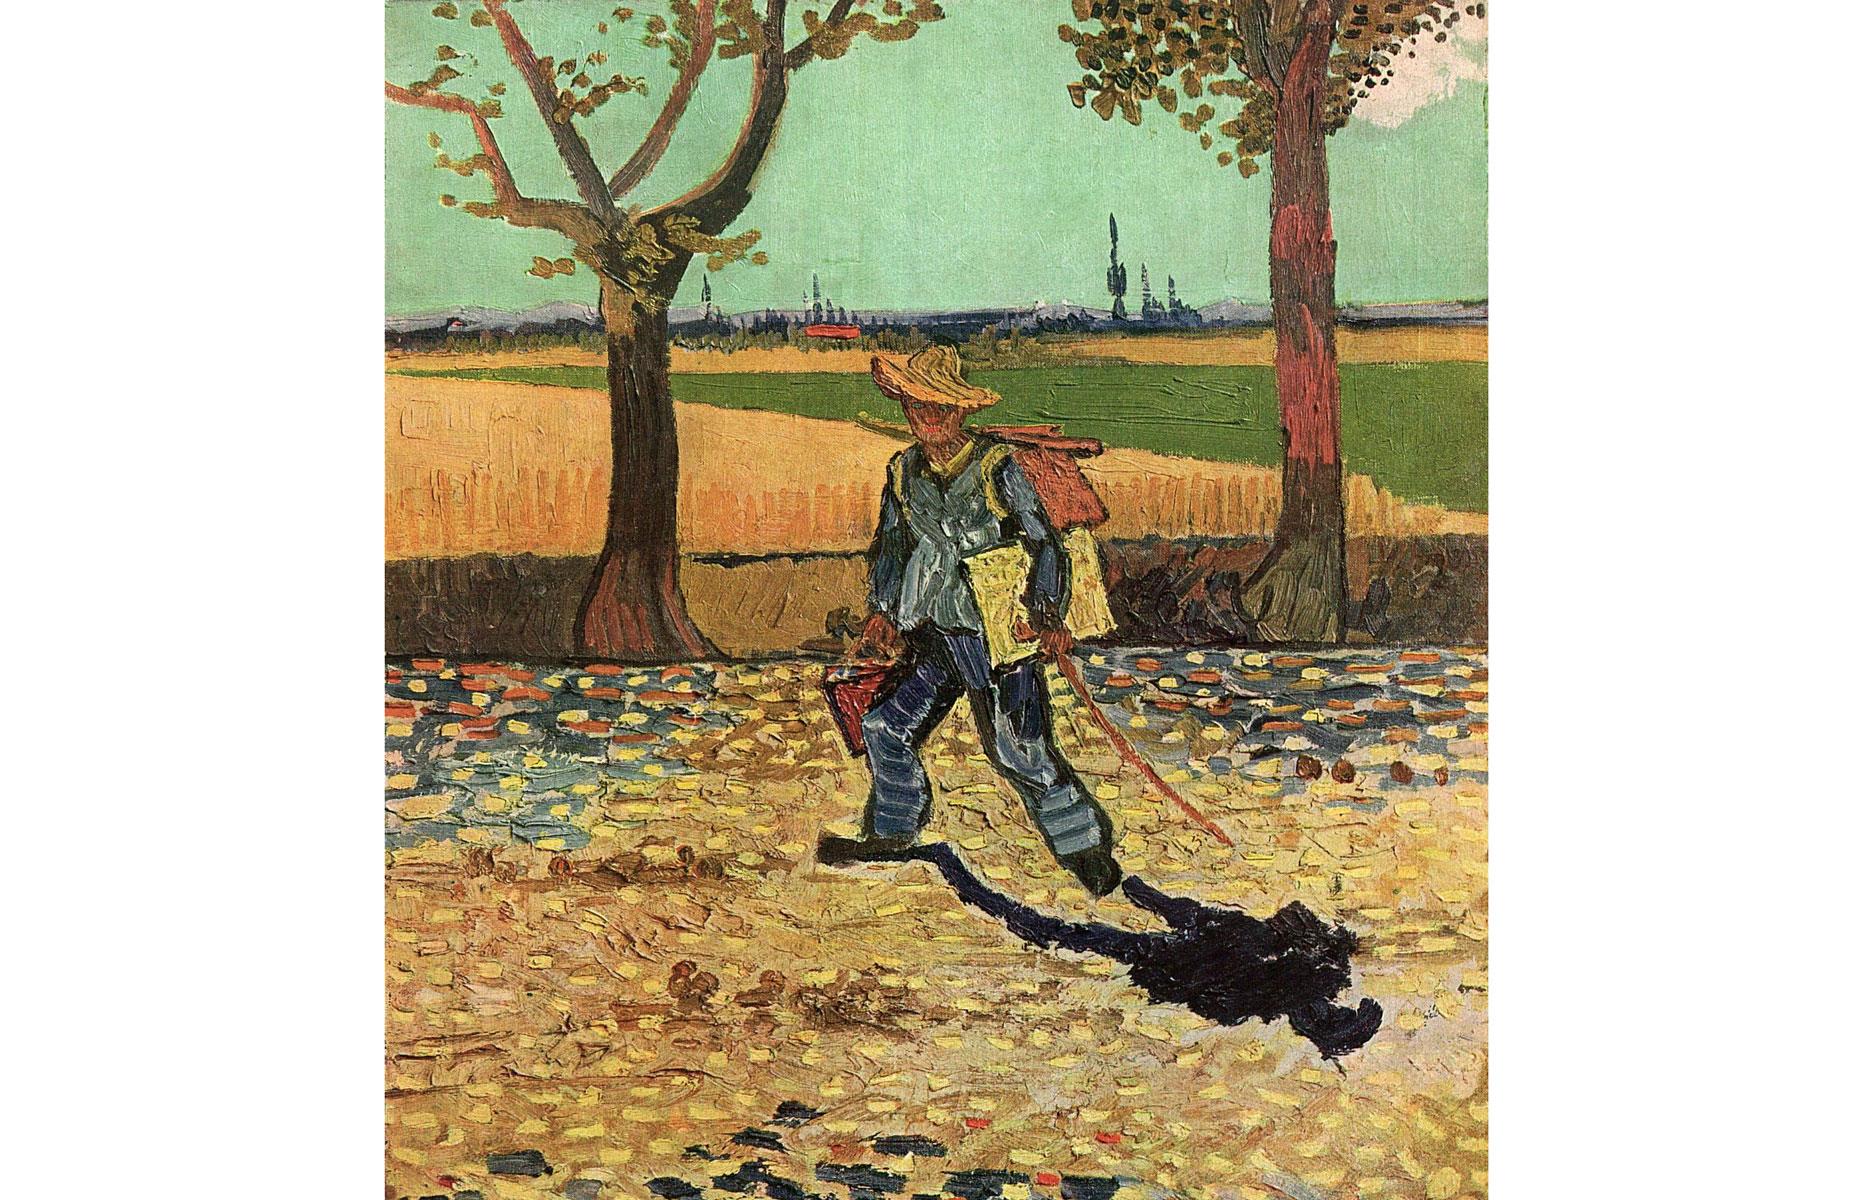 The painter on his way to work by Vincent Van Gogh